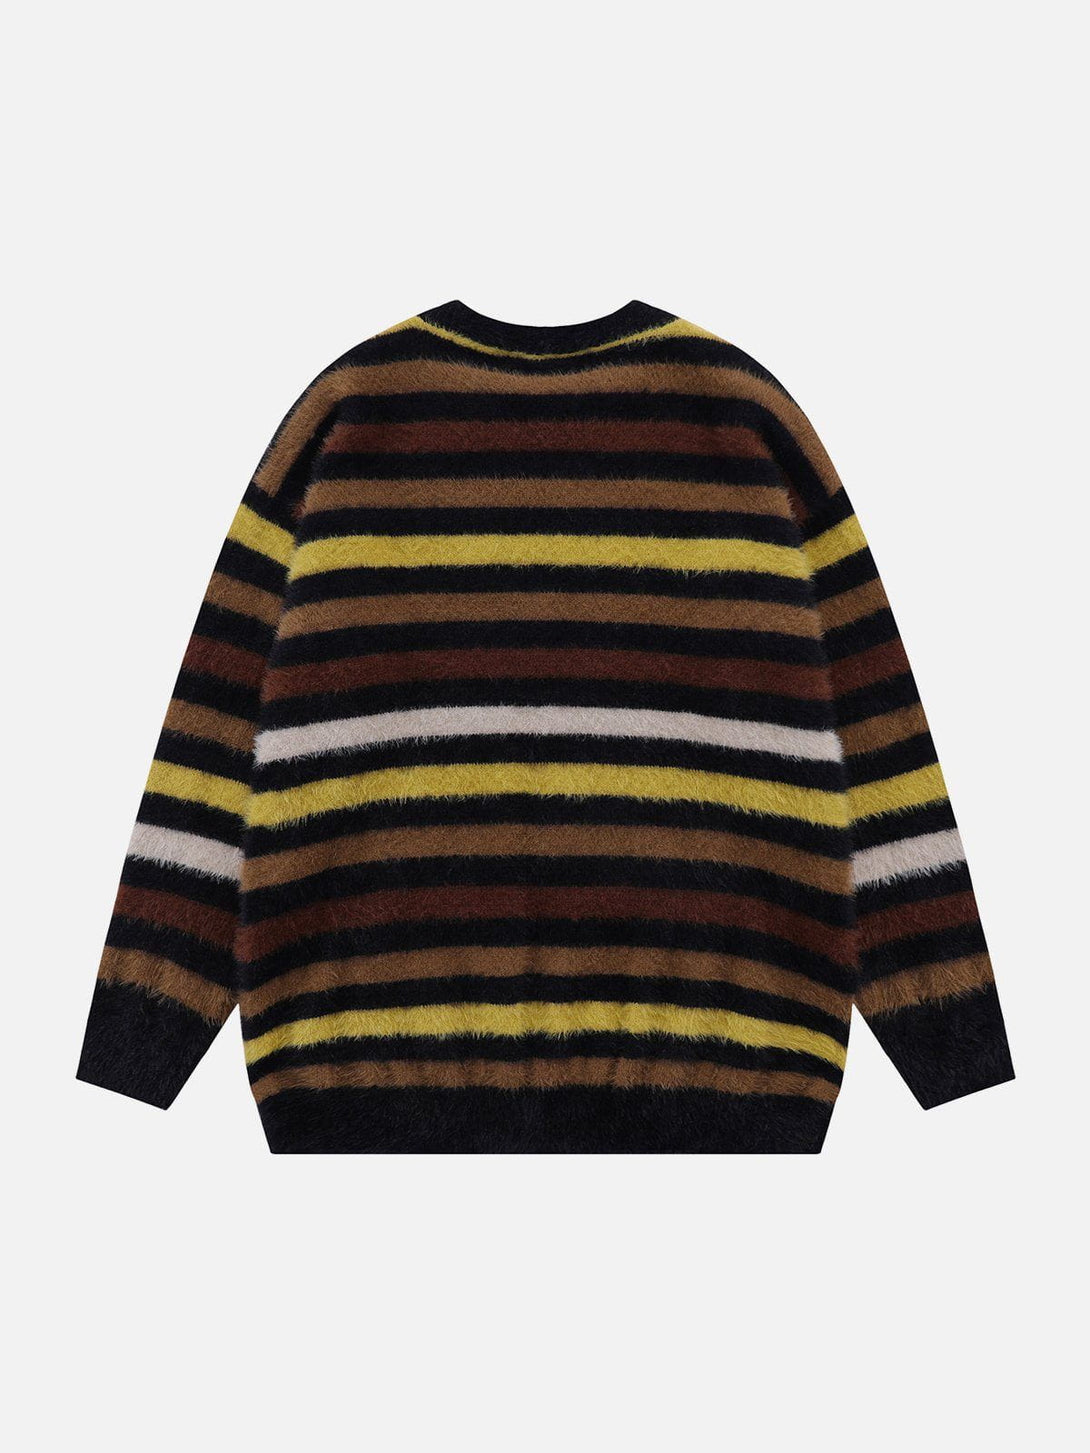 Levefly - Color Striped Star Sweater - Streetwear Fashion - levefly.com